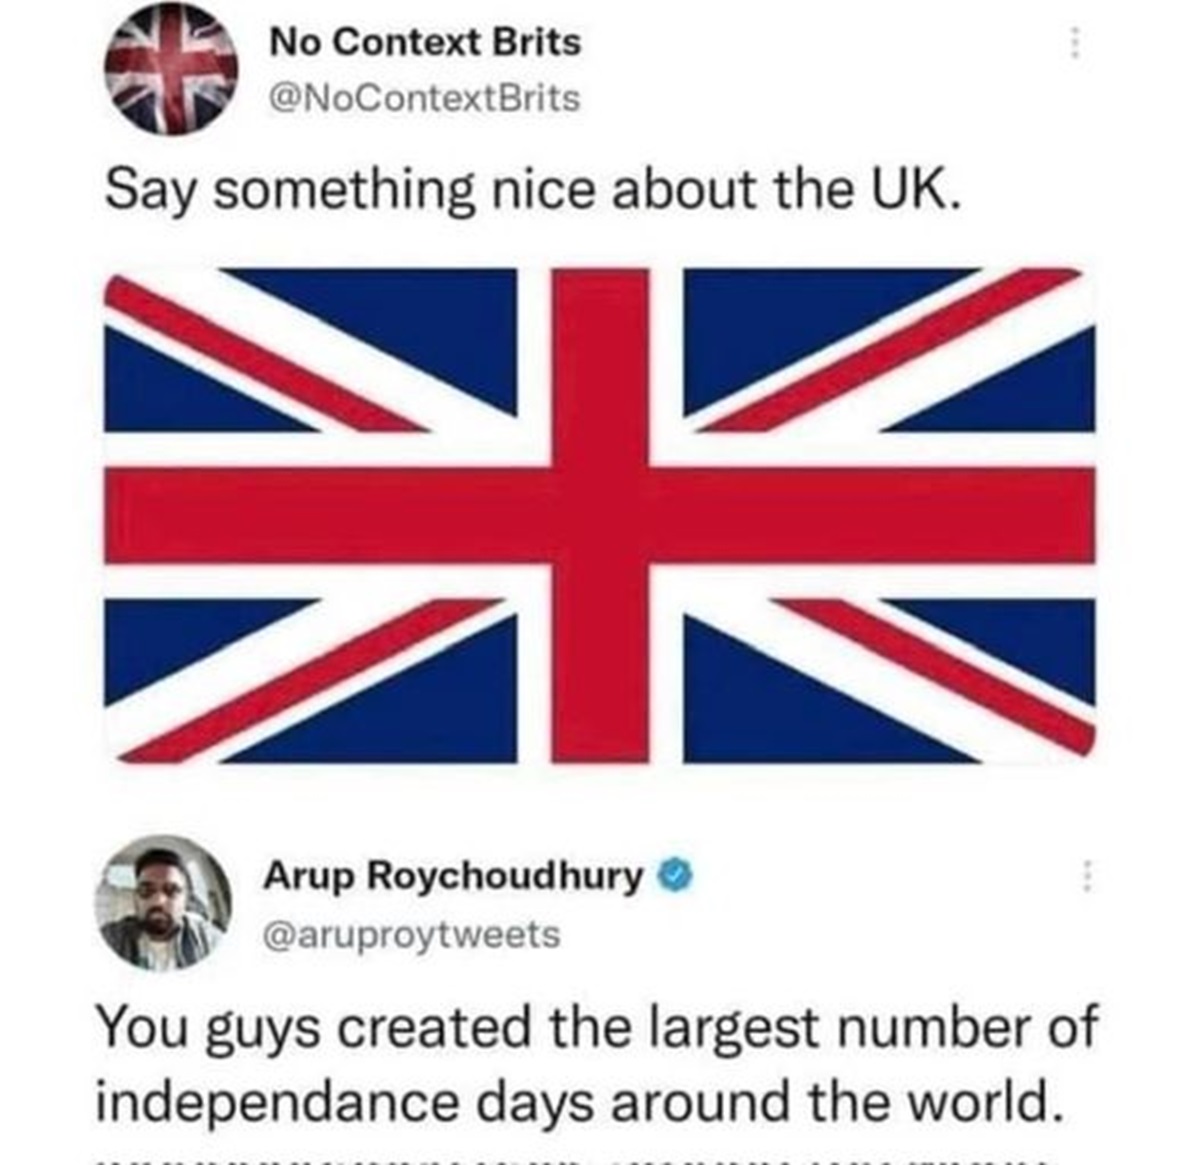 british flag - No Context Brits Say something nice about the Uk. B Arup Roychoudhury You guys created the largest number of independance days around the world.